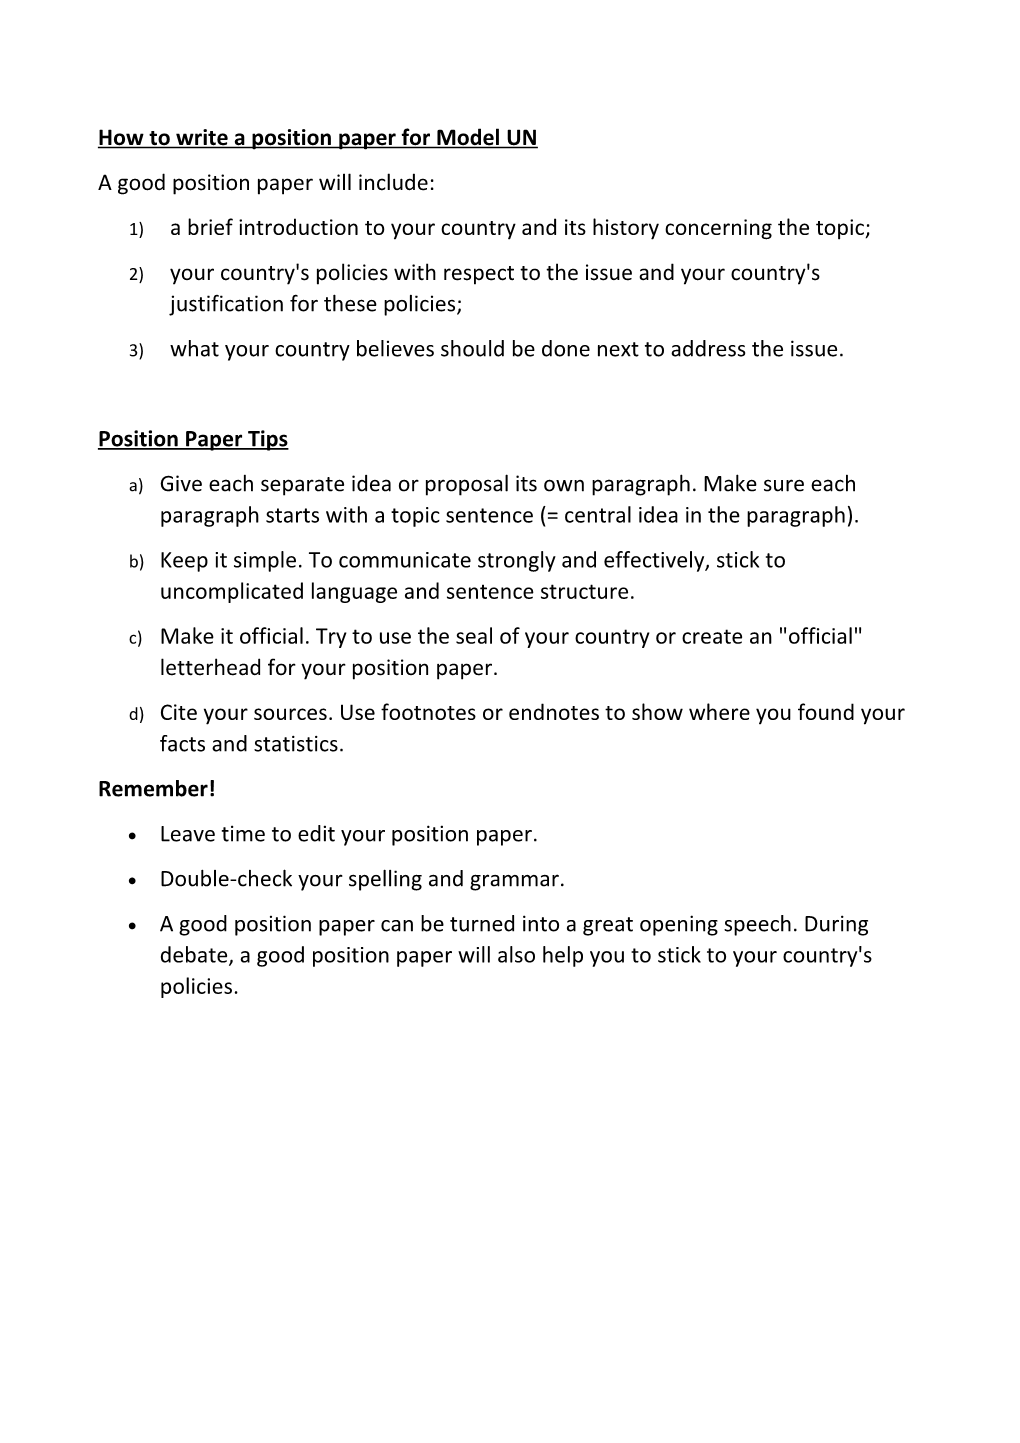 How to Write a Position Paper for Model UN